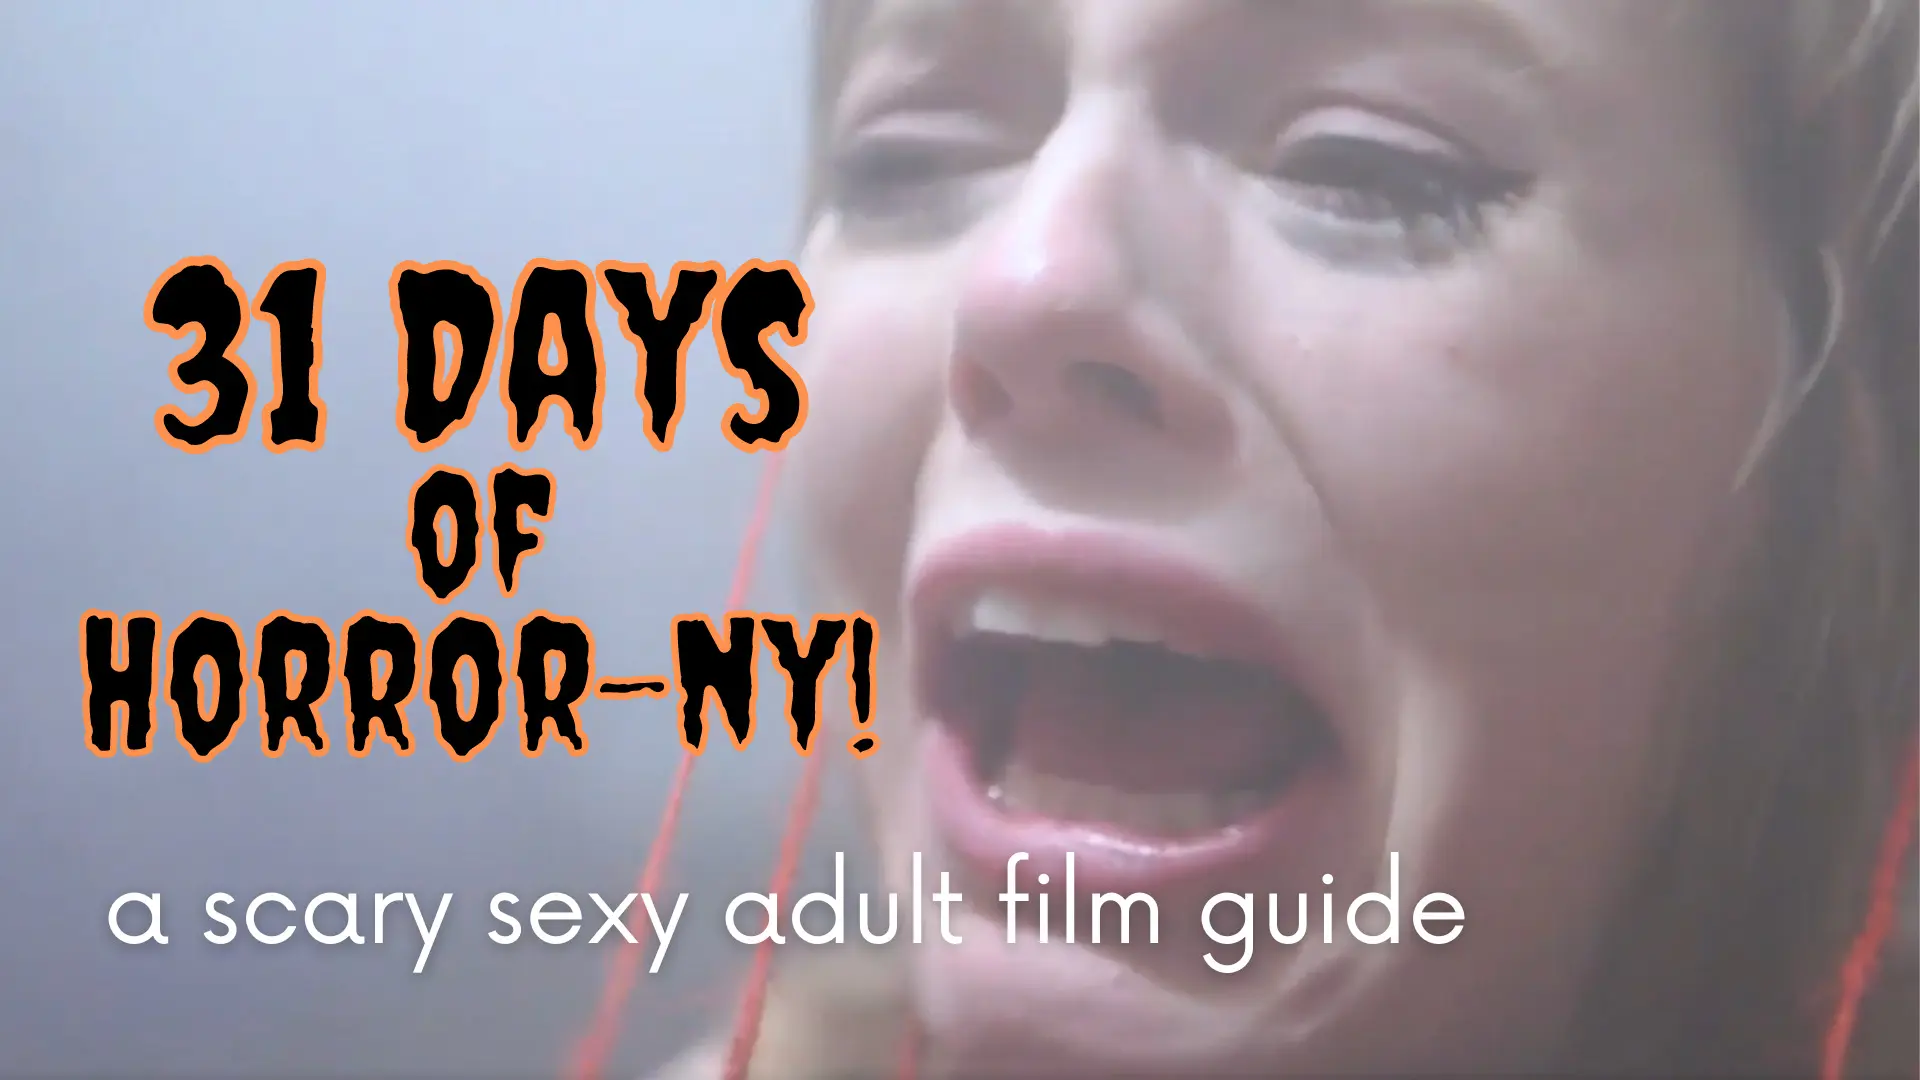 Scary Witch Porn - 31 Days of Horror-ny! Scary Sexy Adult Films - PinkLabel.TV